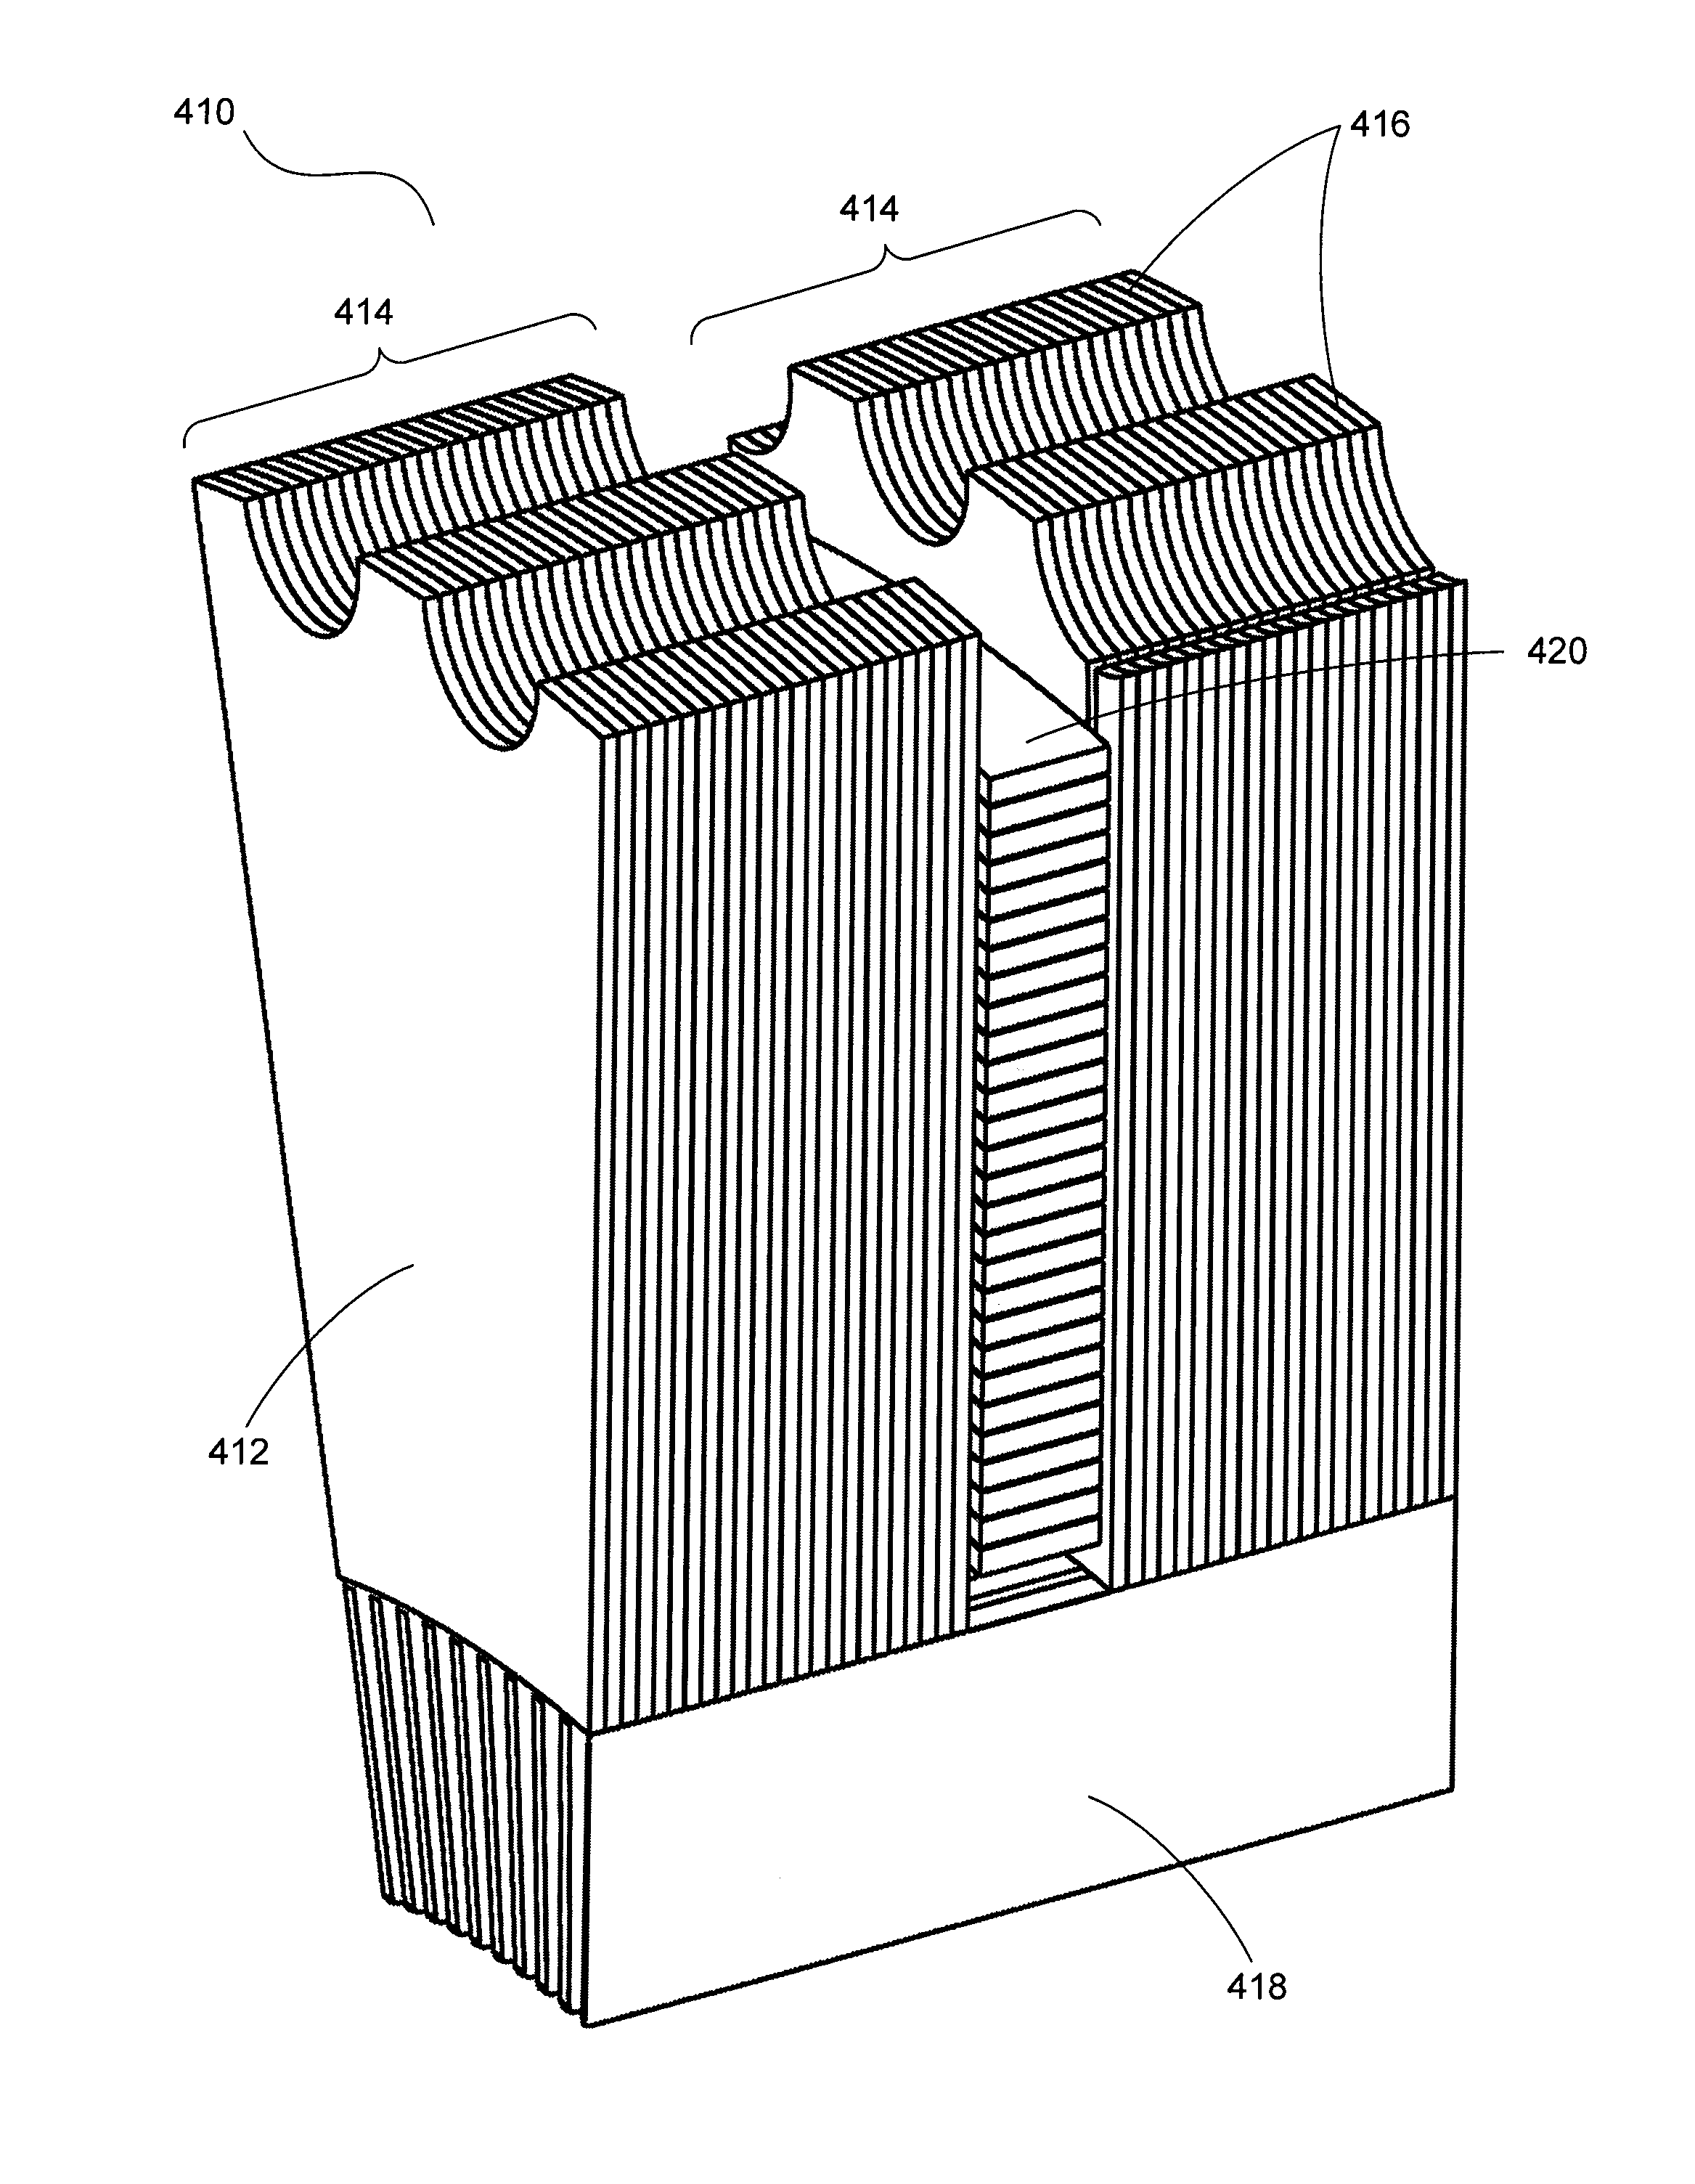 Transverse and/or commutated flux systems having segmented stator laminations